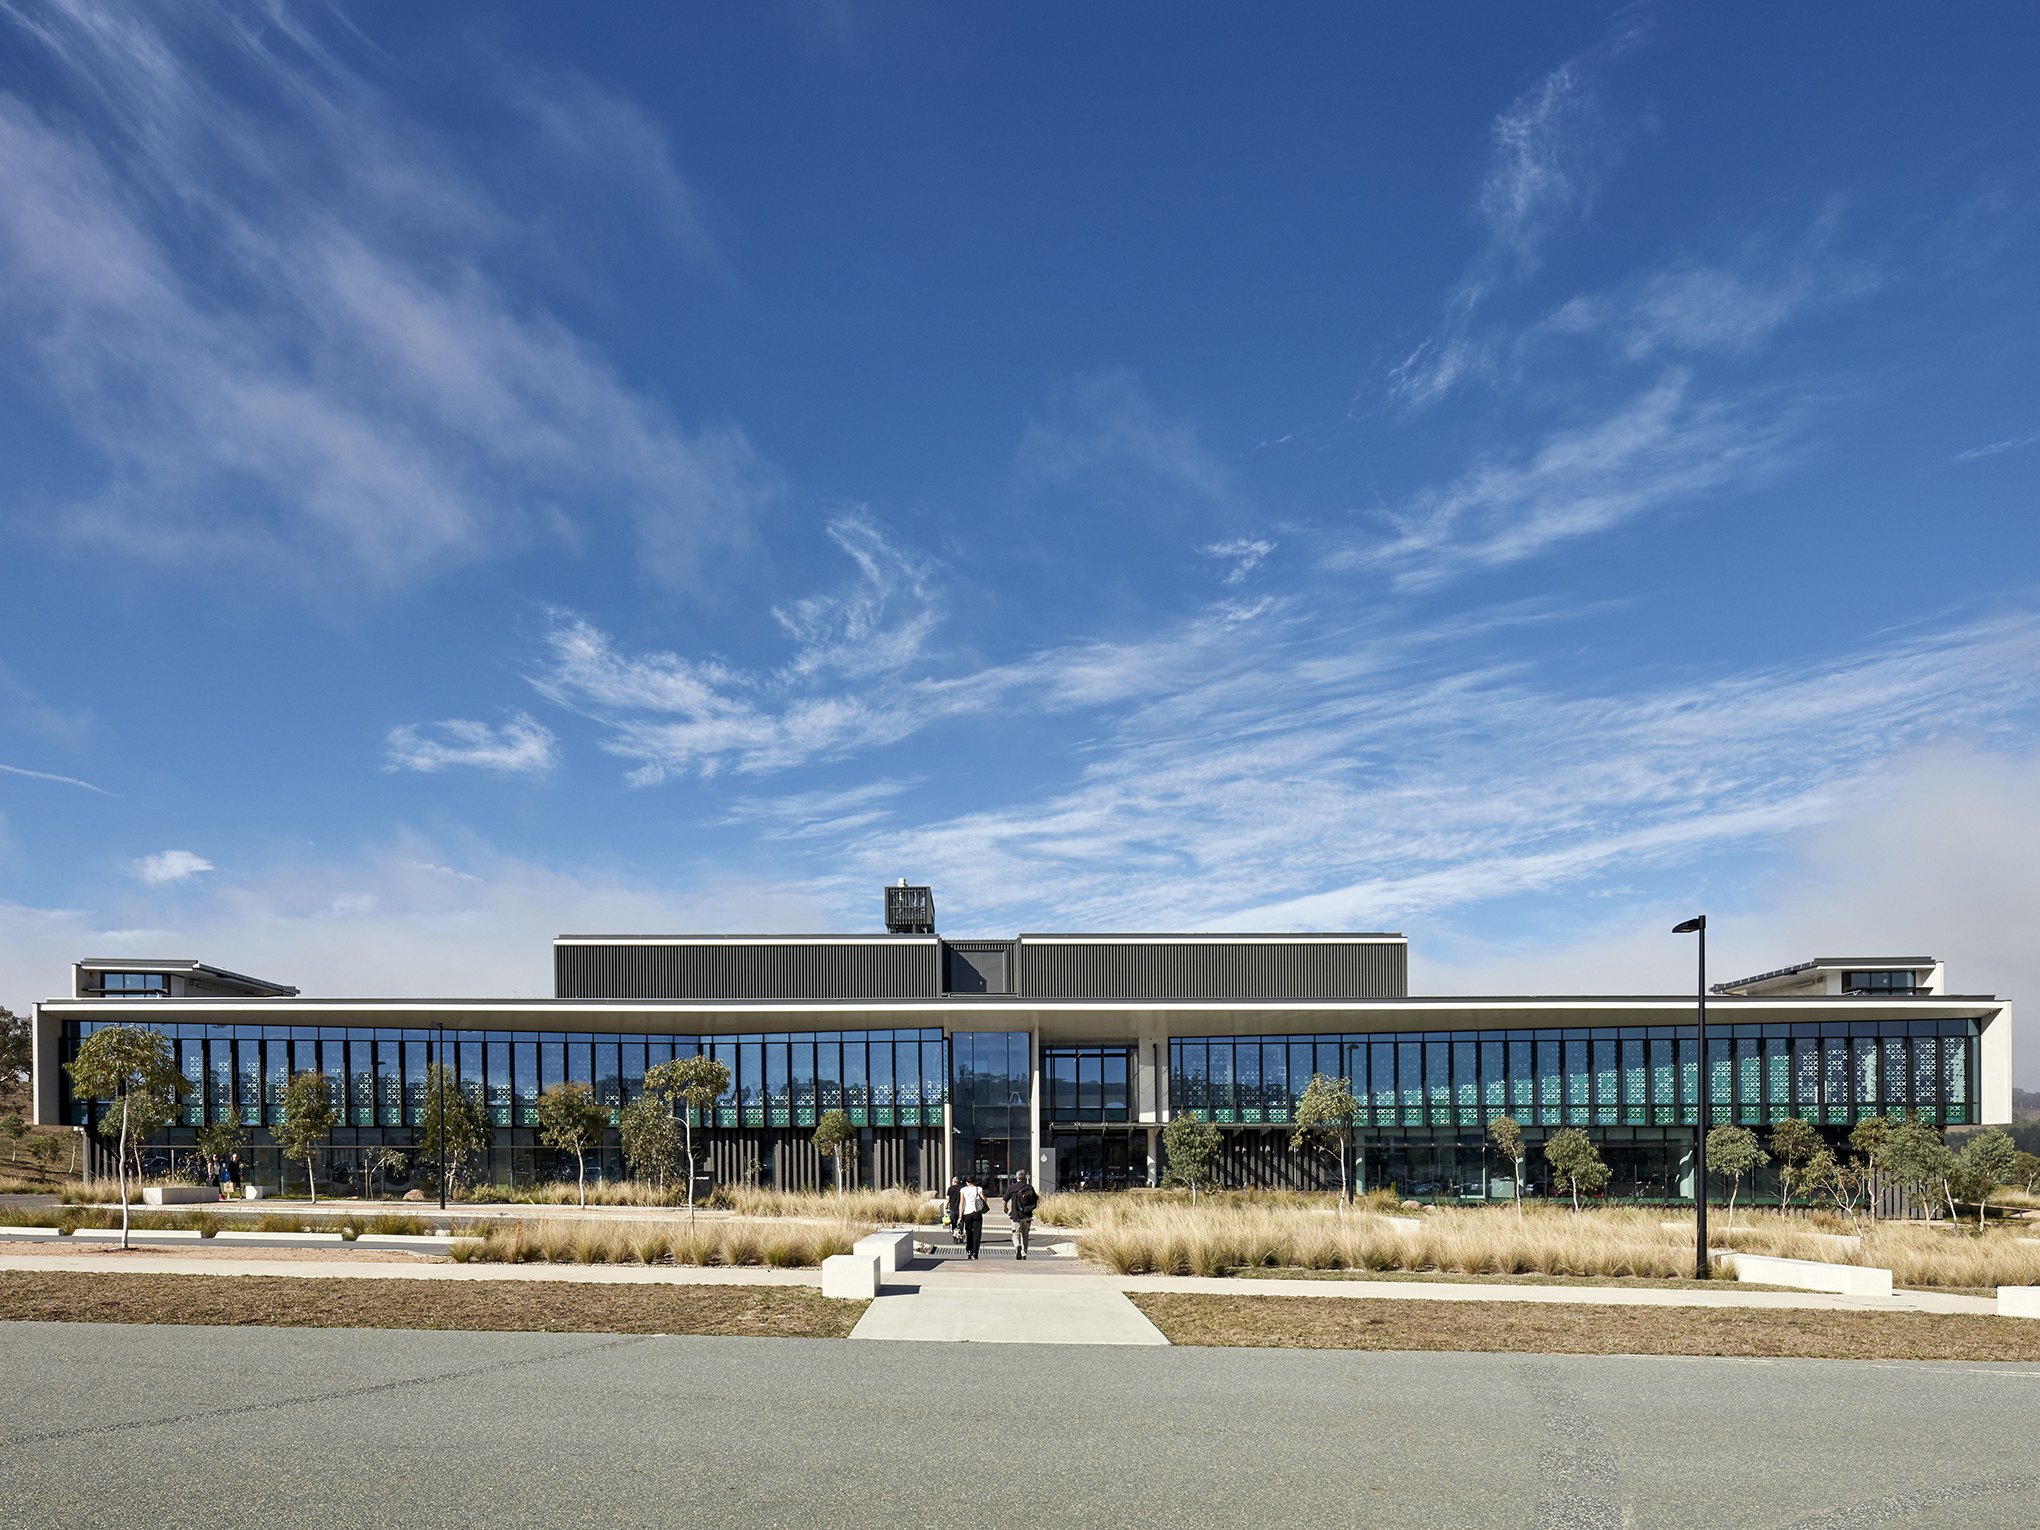 The AFP Forensics and Data Centre. Photography by Christopher Frederick Jones
